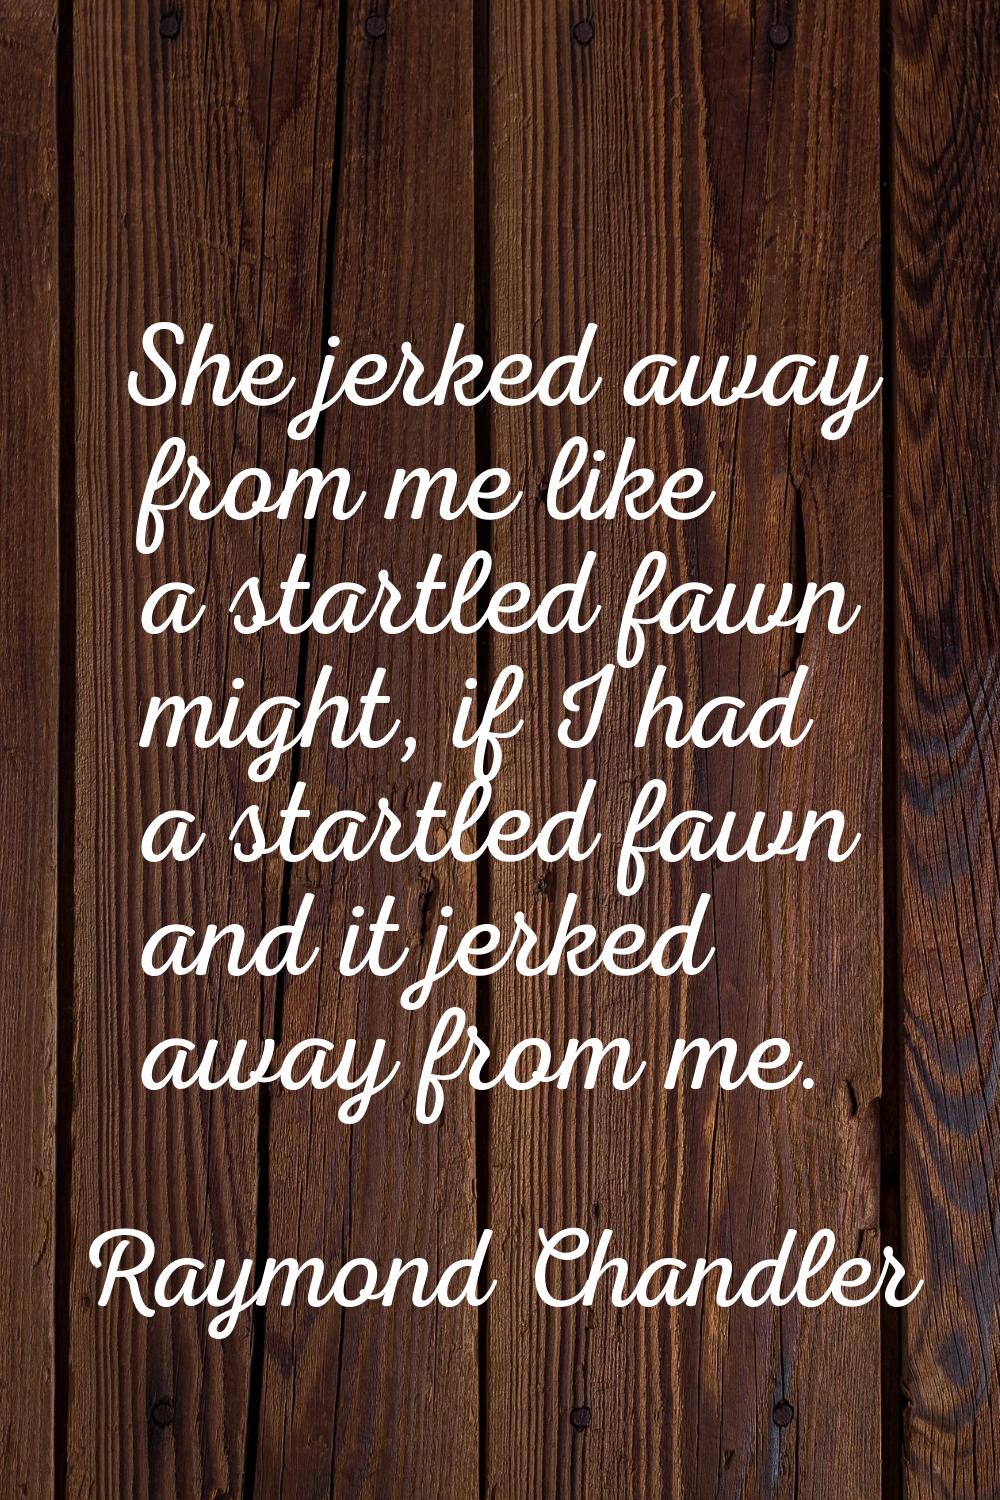 She jerked away from me like a startled fawn might, if I had a startled fawn and it jerked away fro